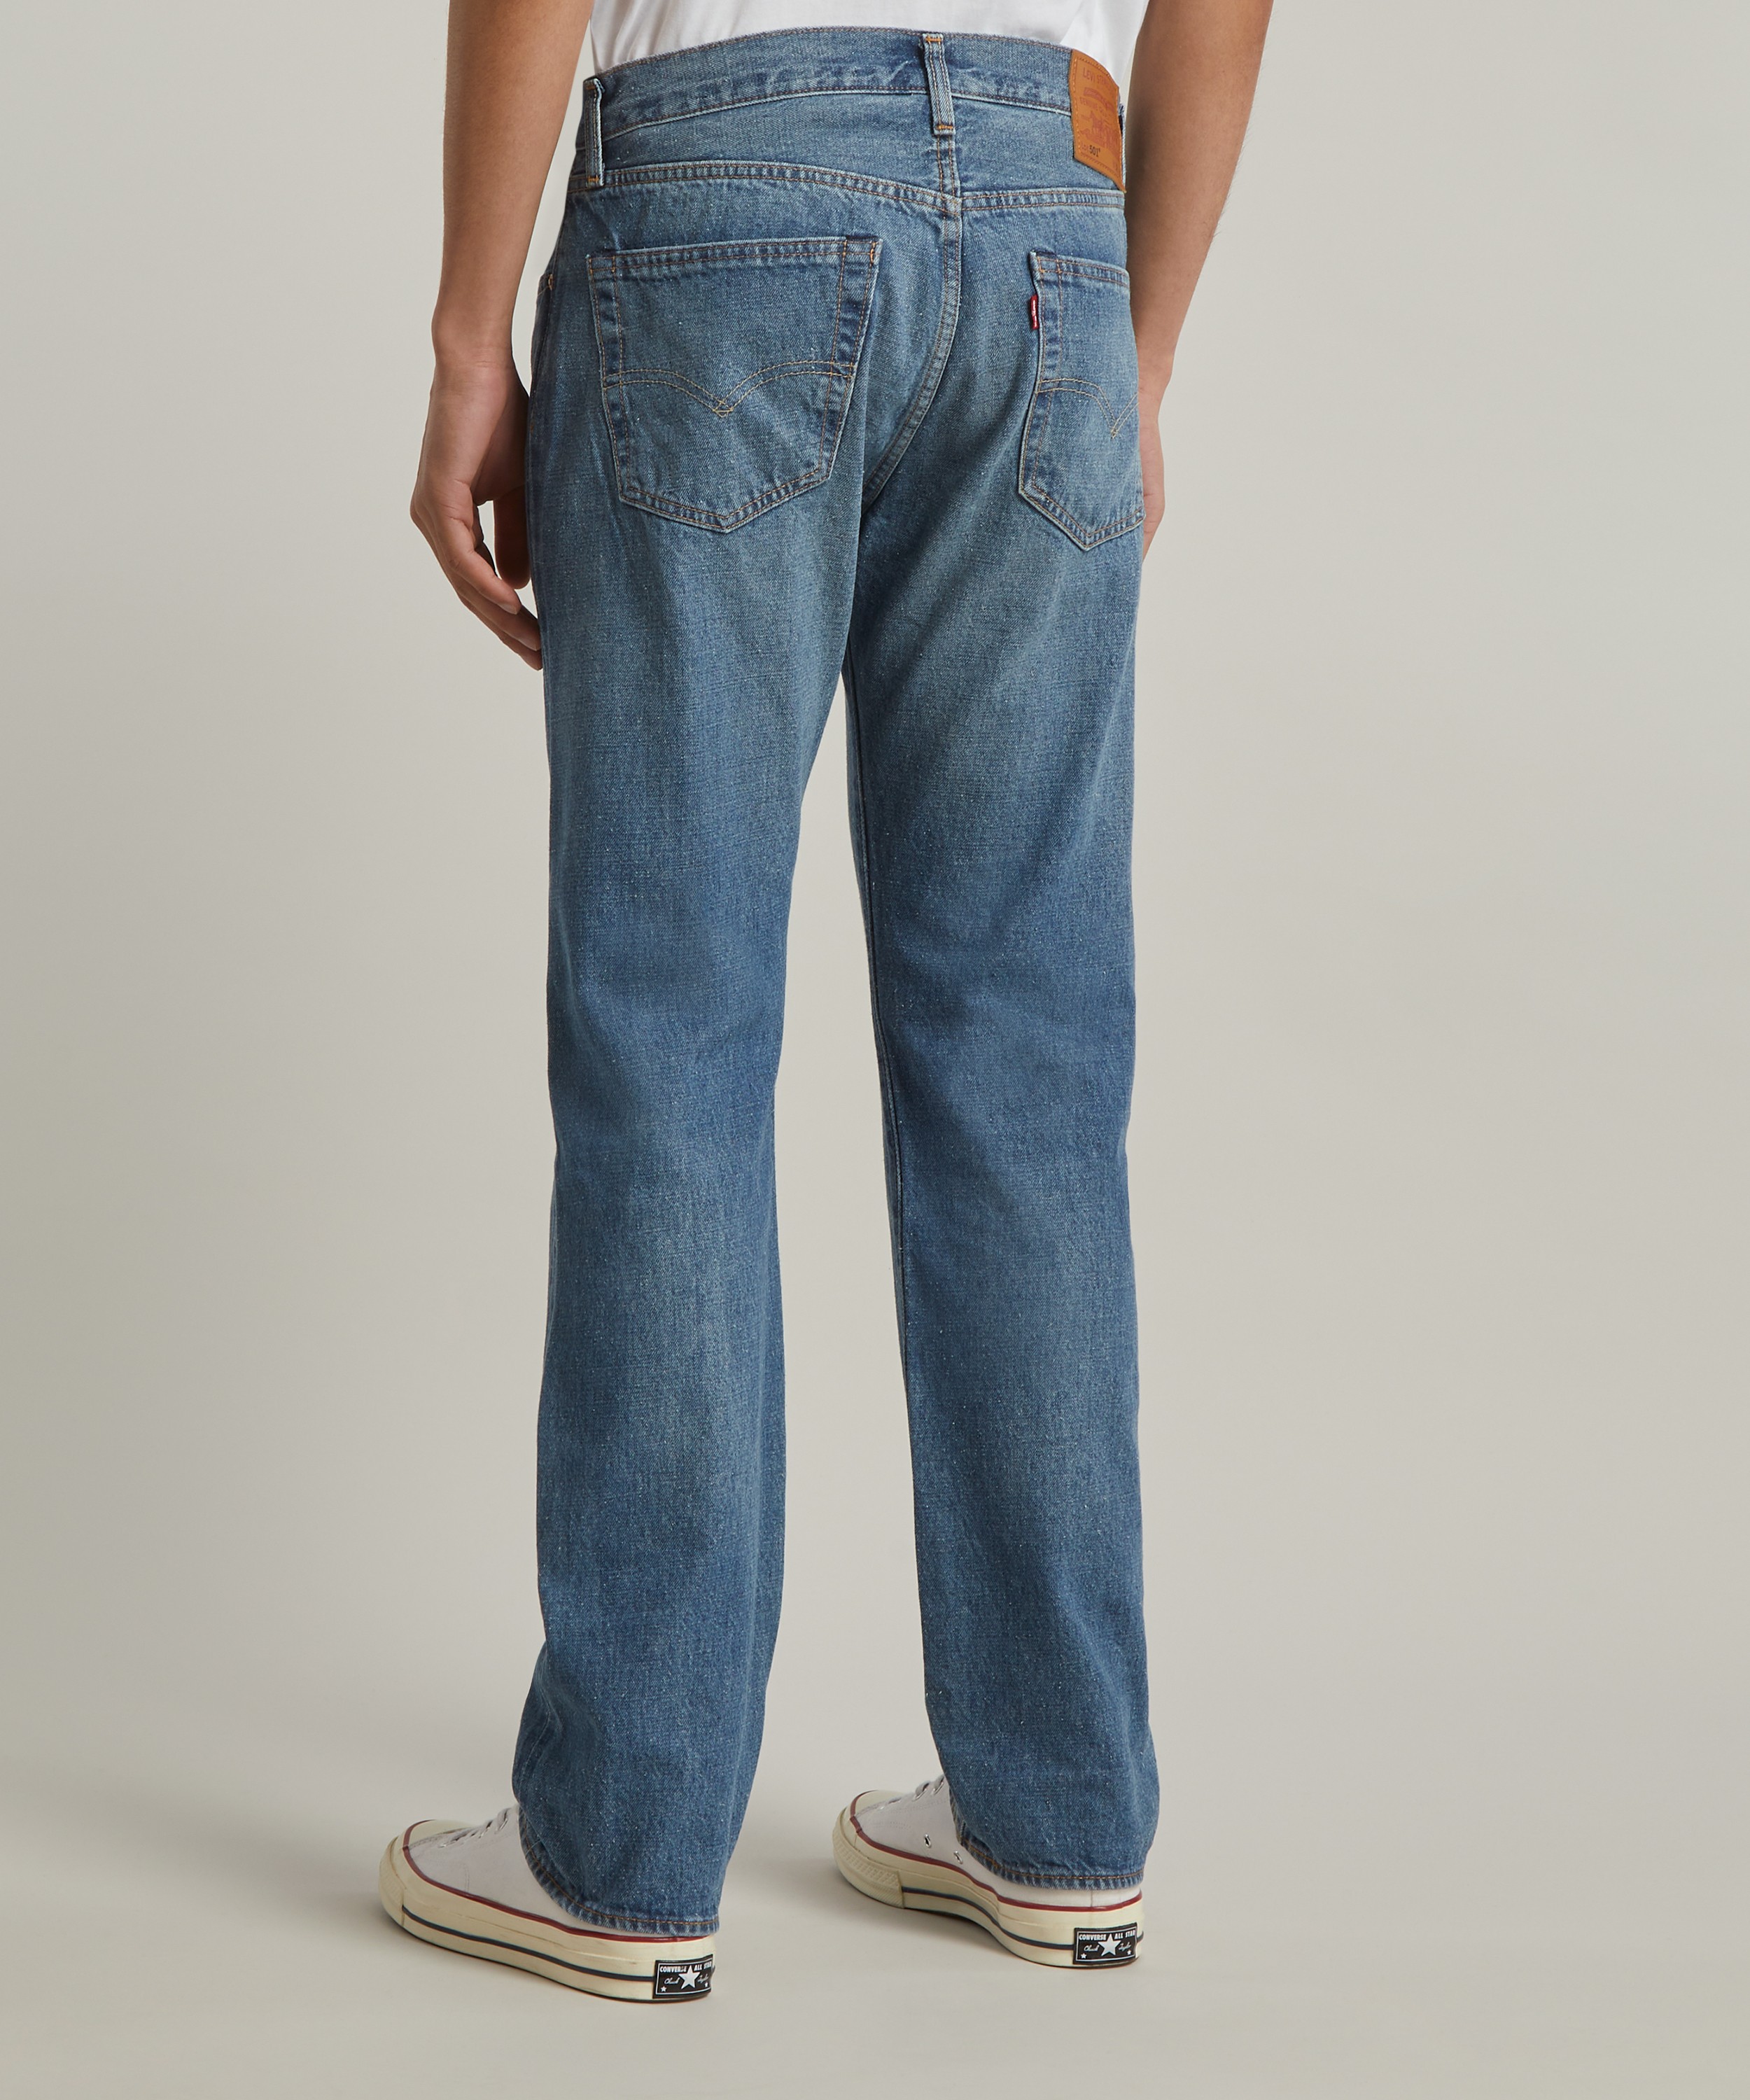 Levi's Made & Crafted - 501® Original Selvedge Jeans image number 3